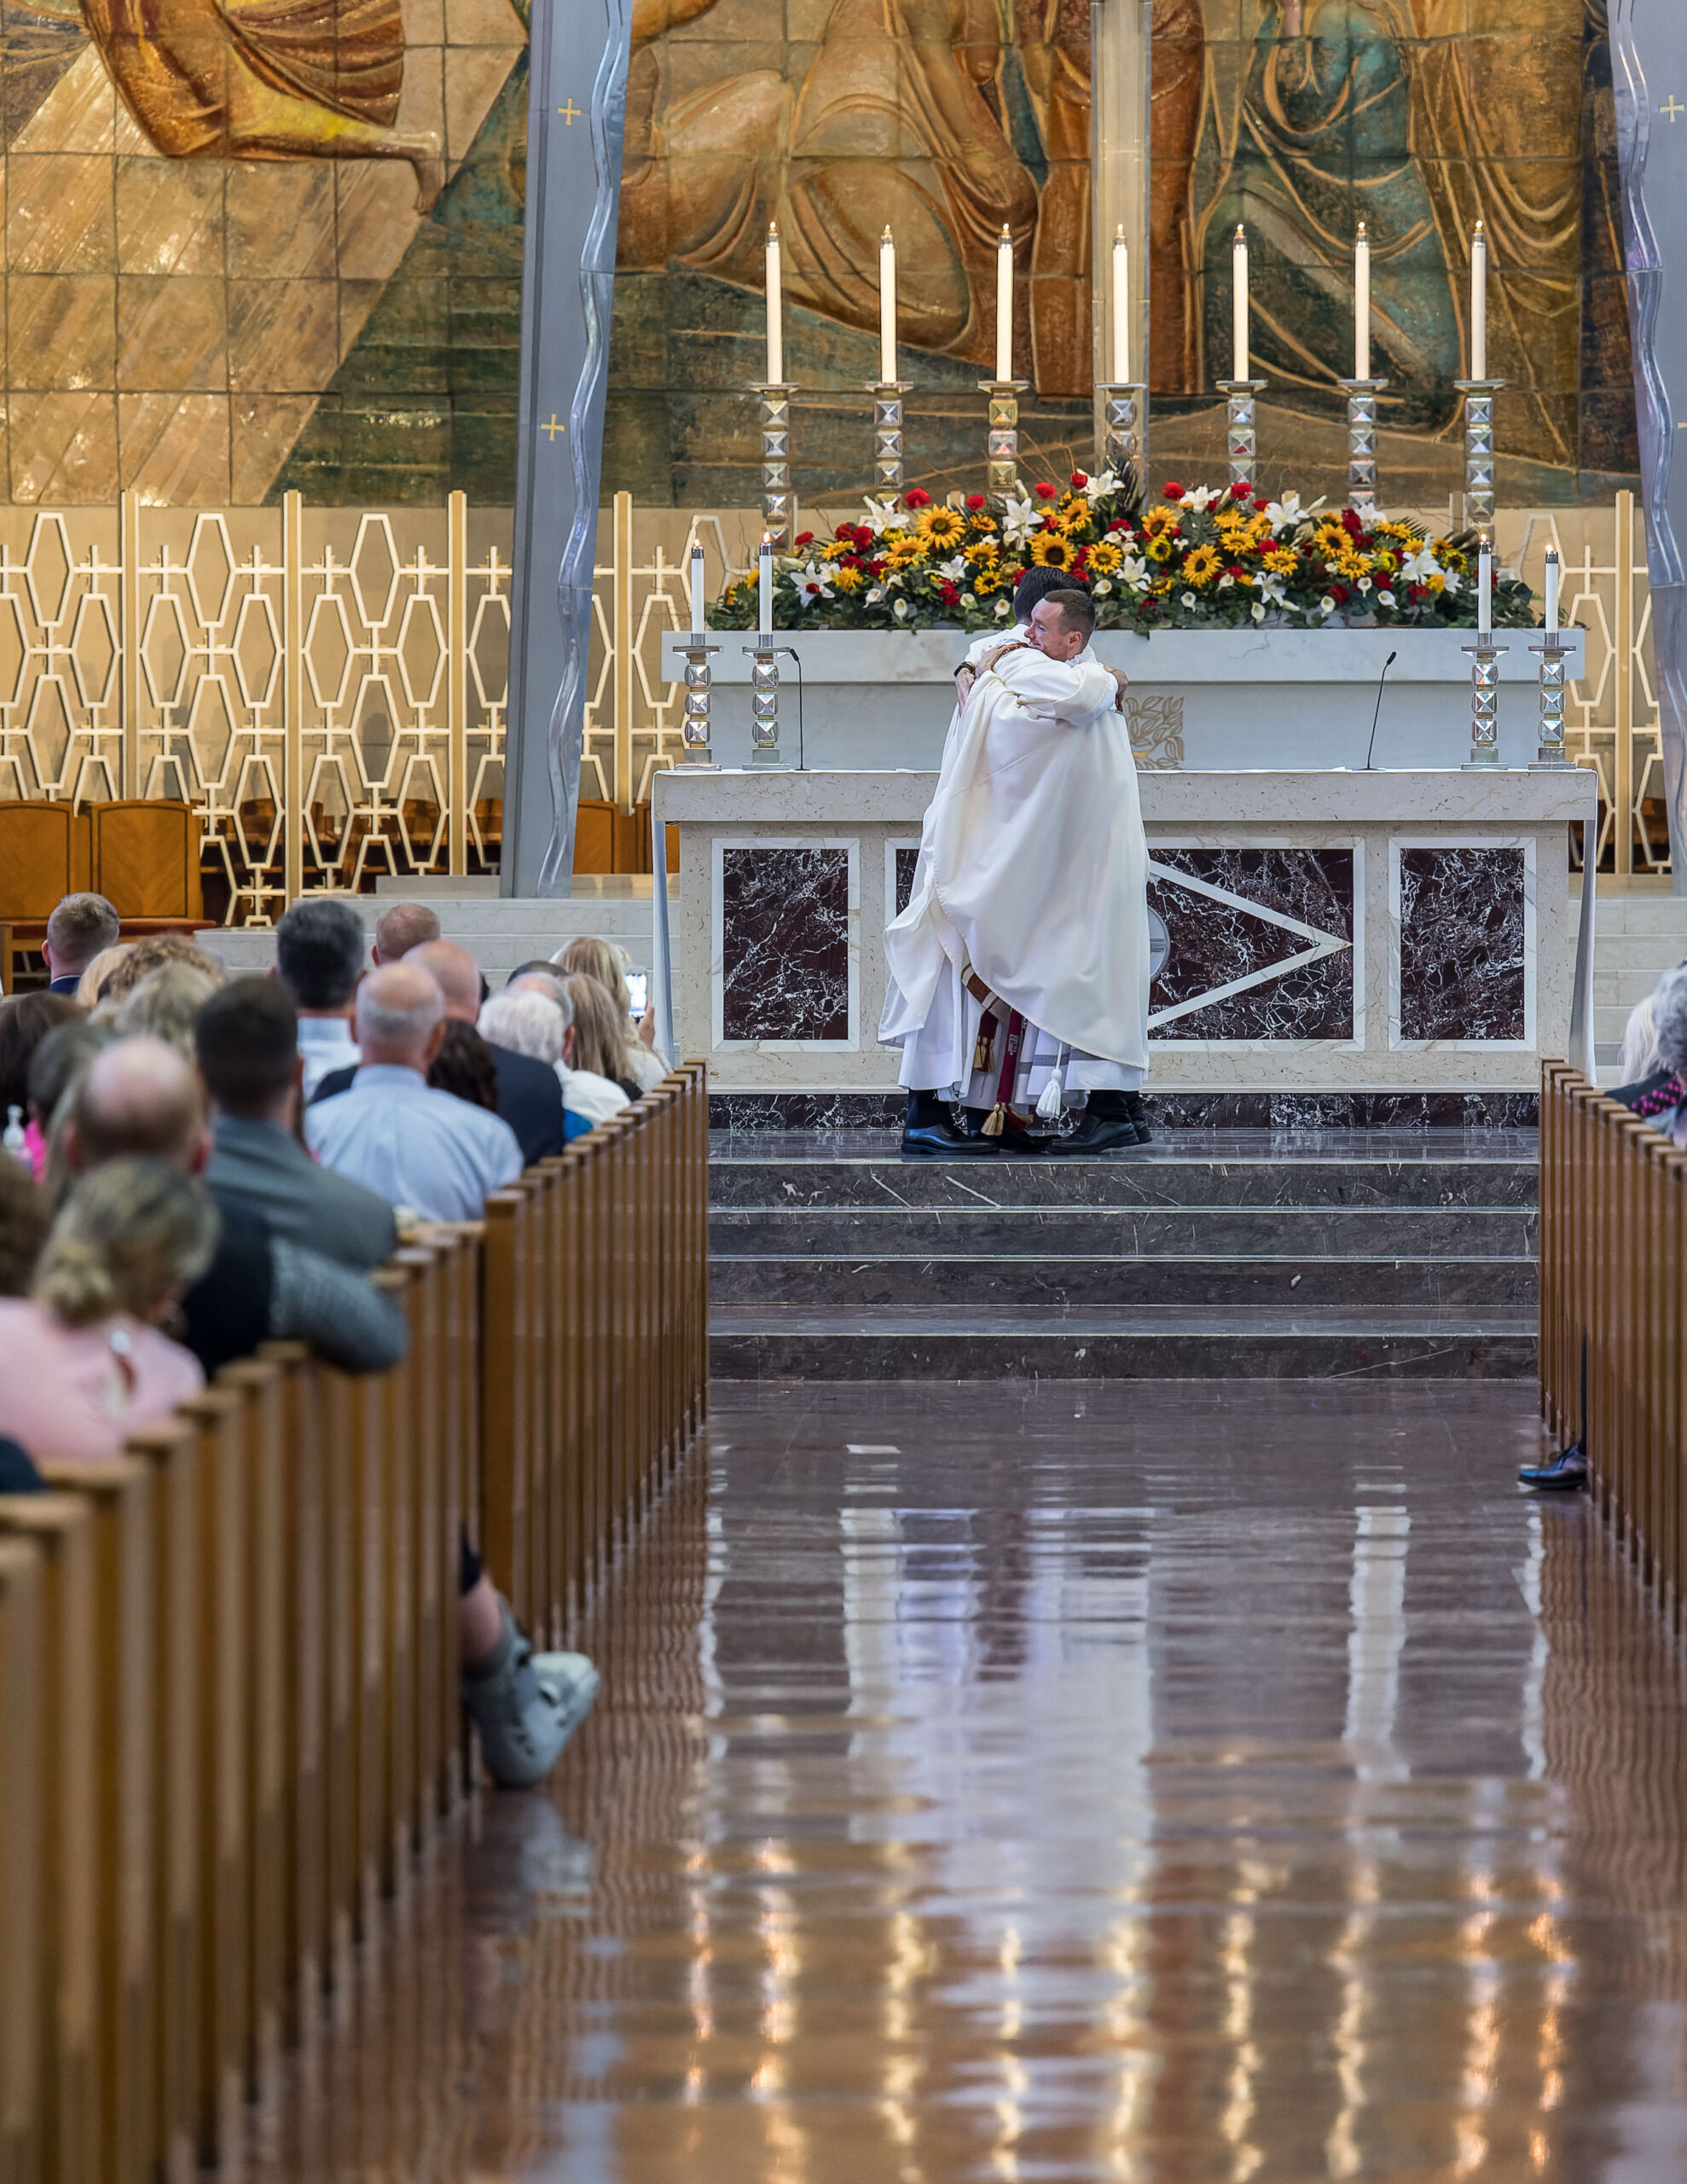 Father Joseph MacNeill, left, and Father Matthew Collins, right, embrace at the conclusion of the Kiss of Peace as they realize they are now priests. Photo by Aaron Joseph